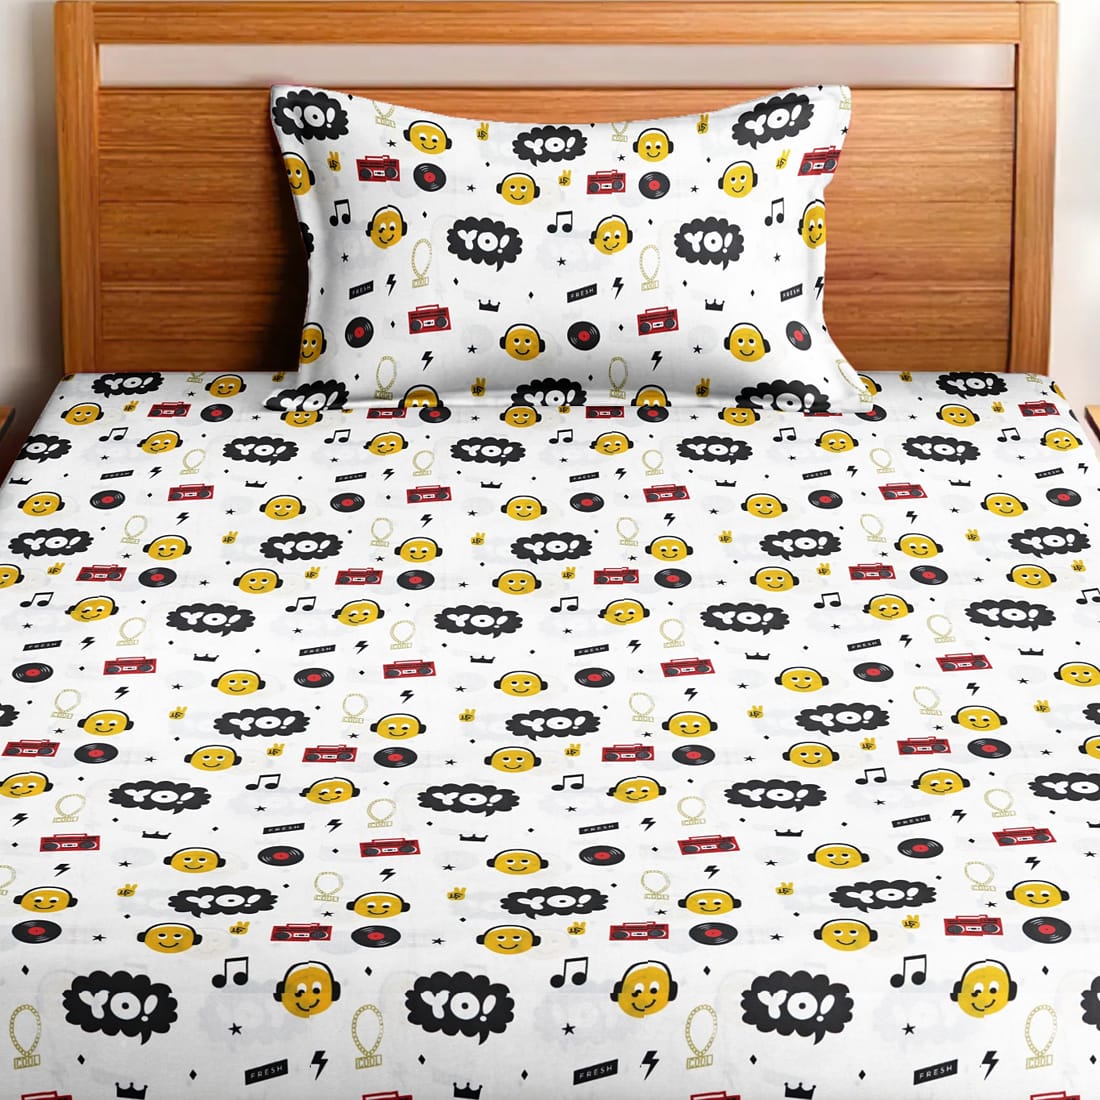 Soft Cotton Digital Print Single Fitted Bedsheet For kids In Yellow